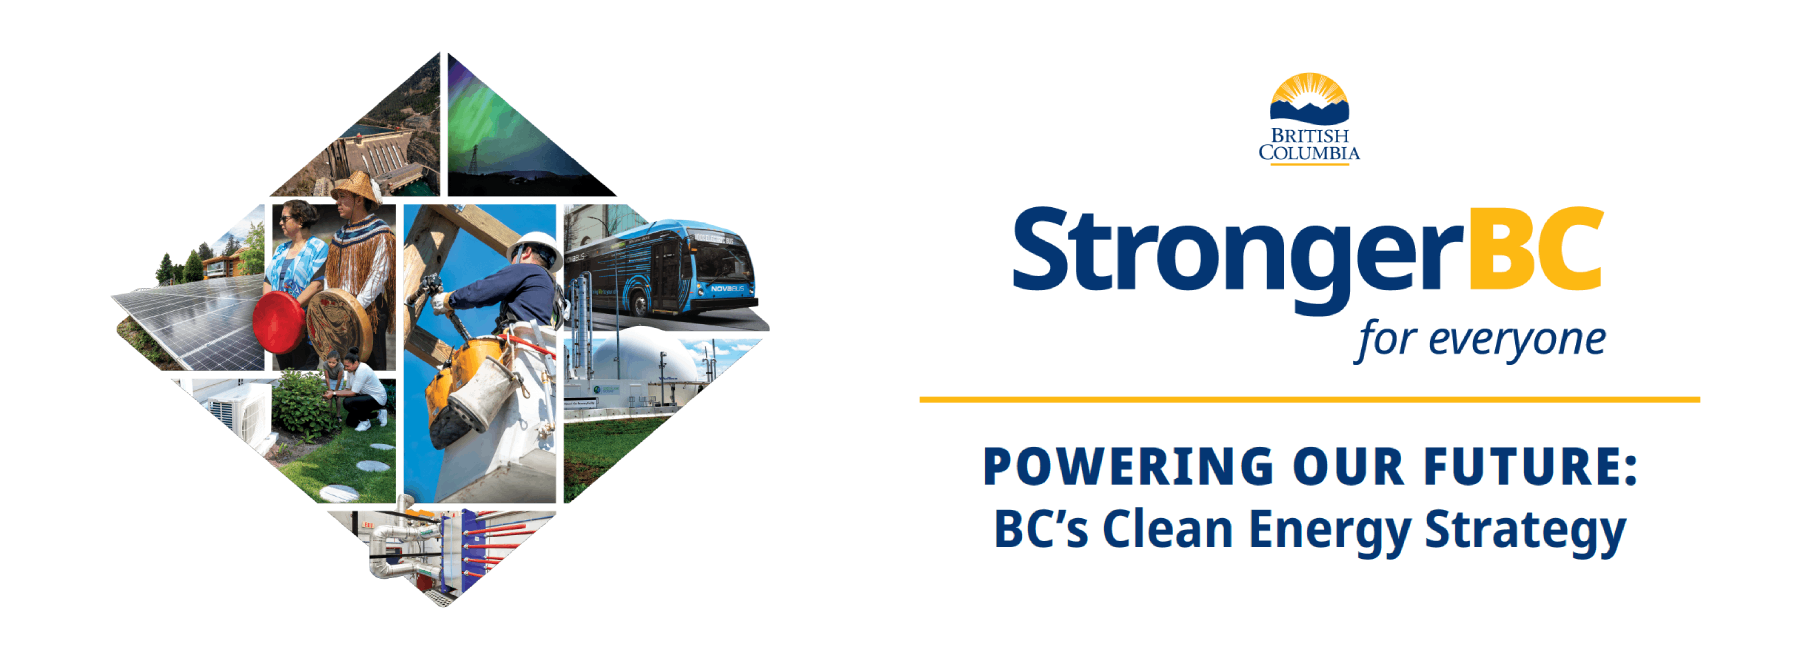 Powering Our Future: BC's Clean Energy Strategy